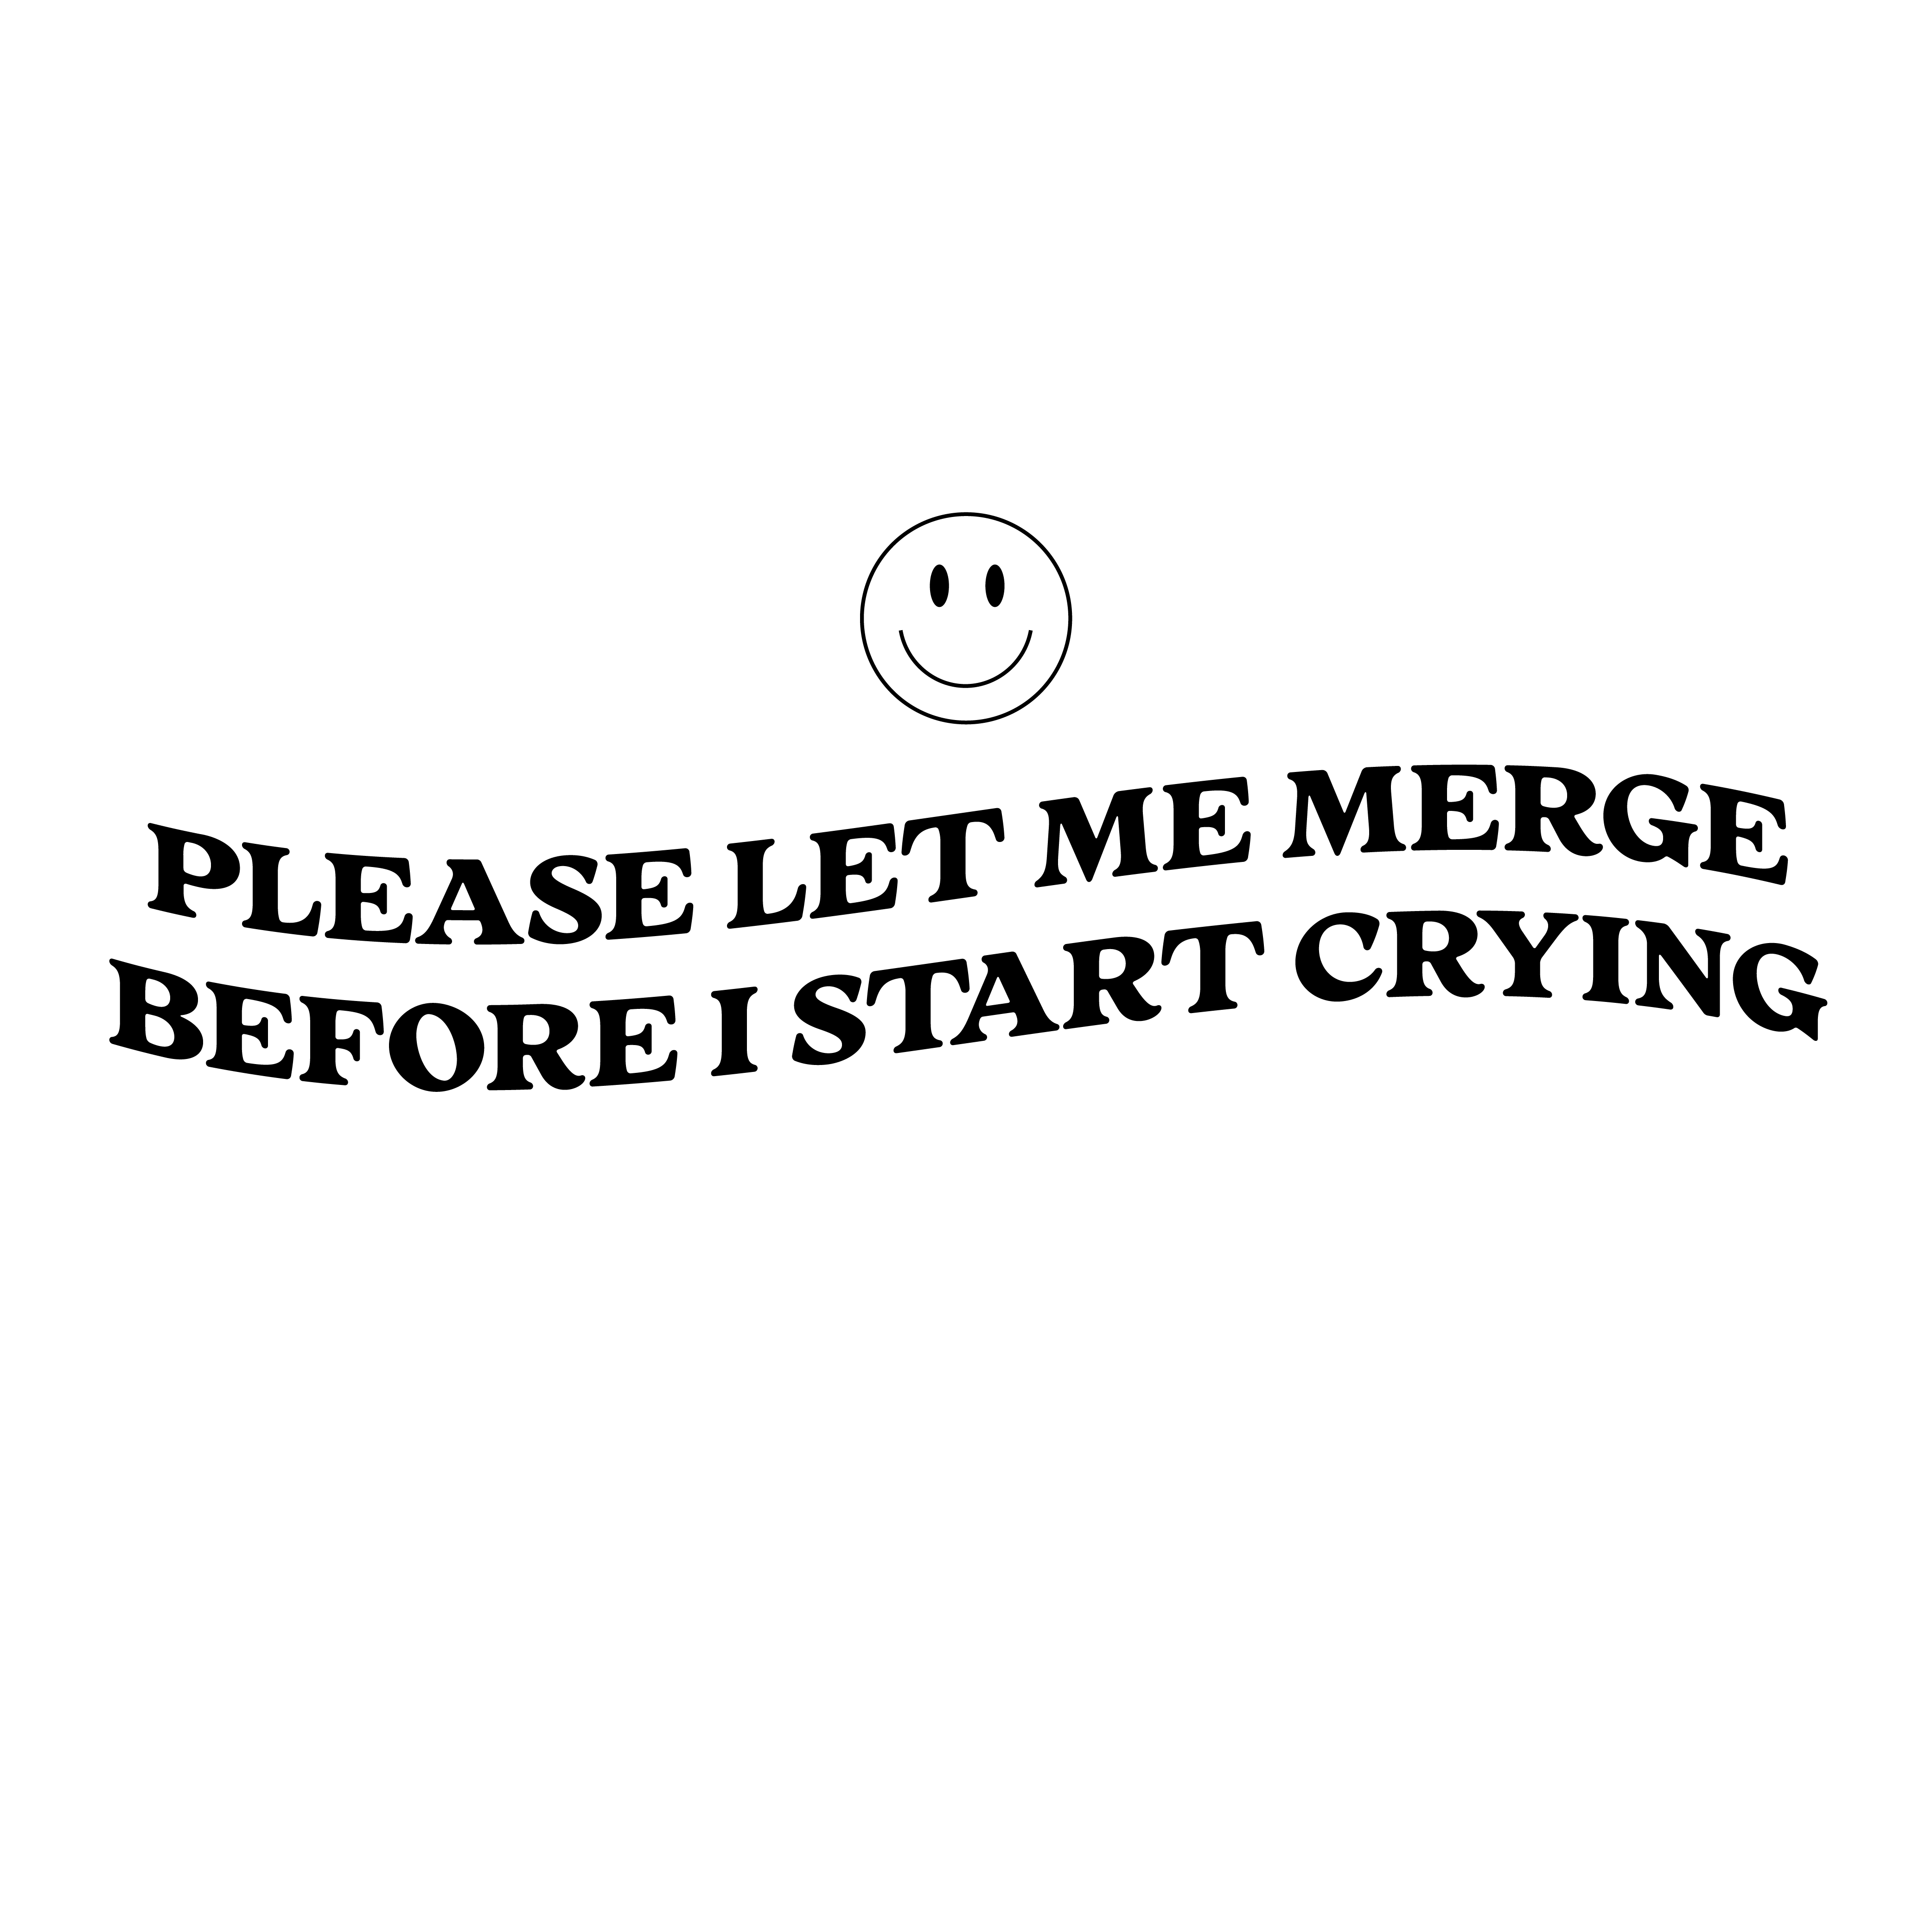 Let me merge before I cry decal